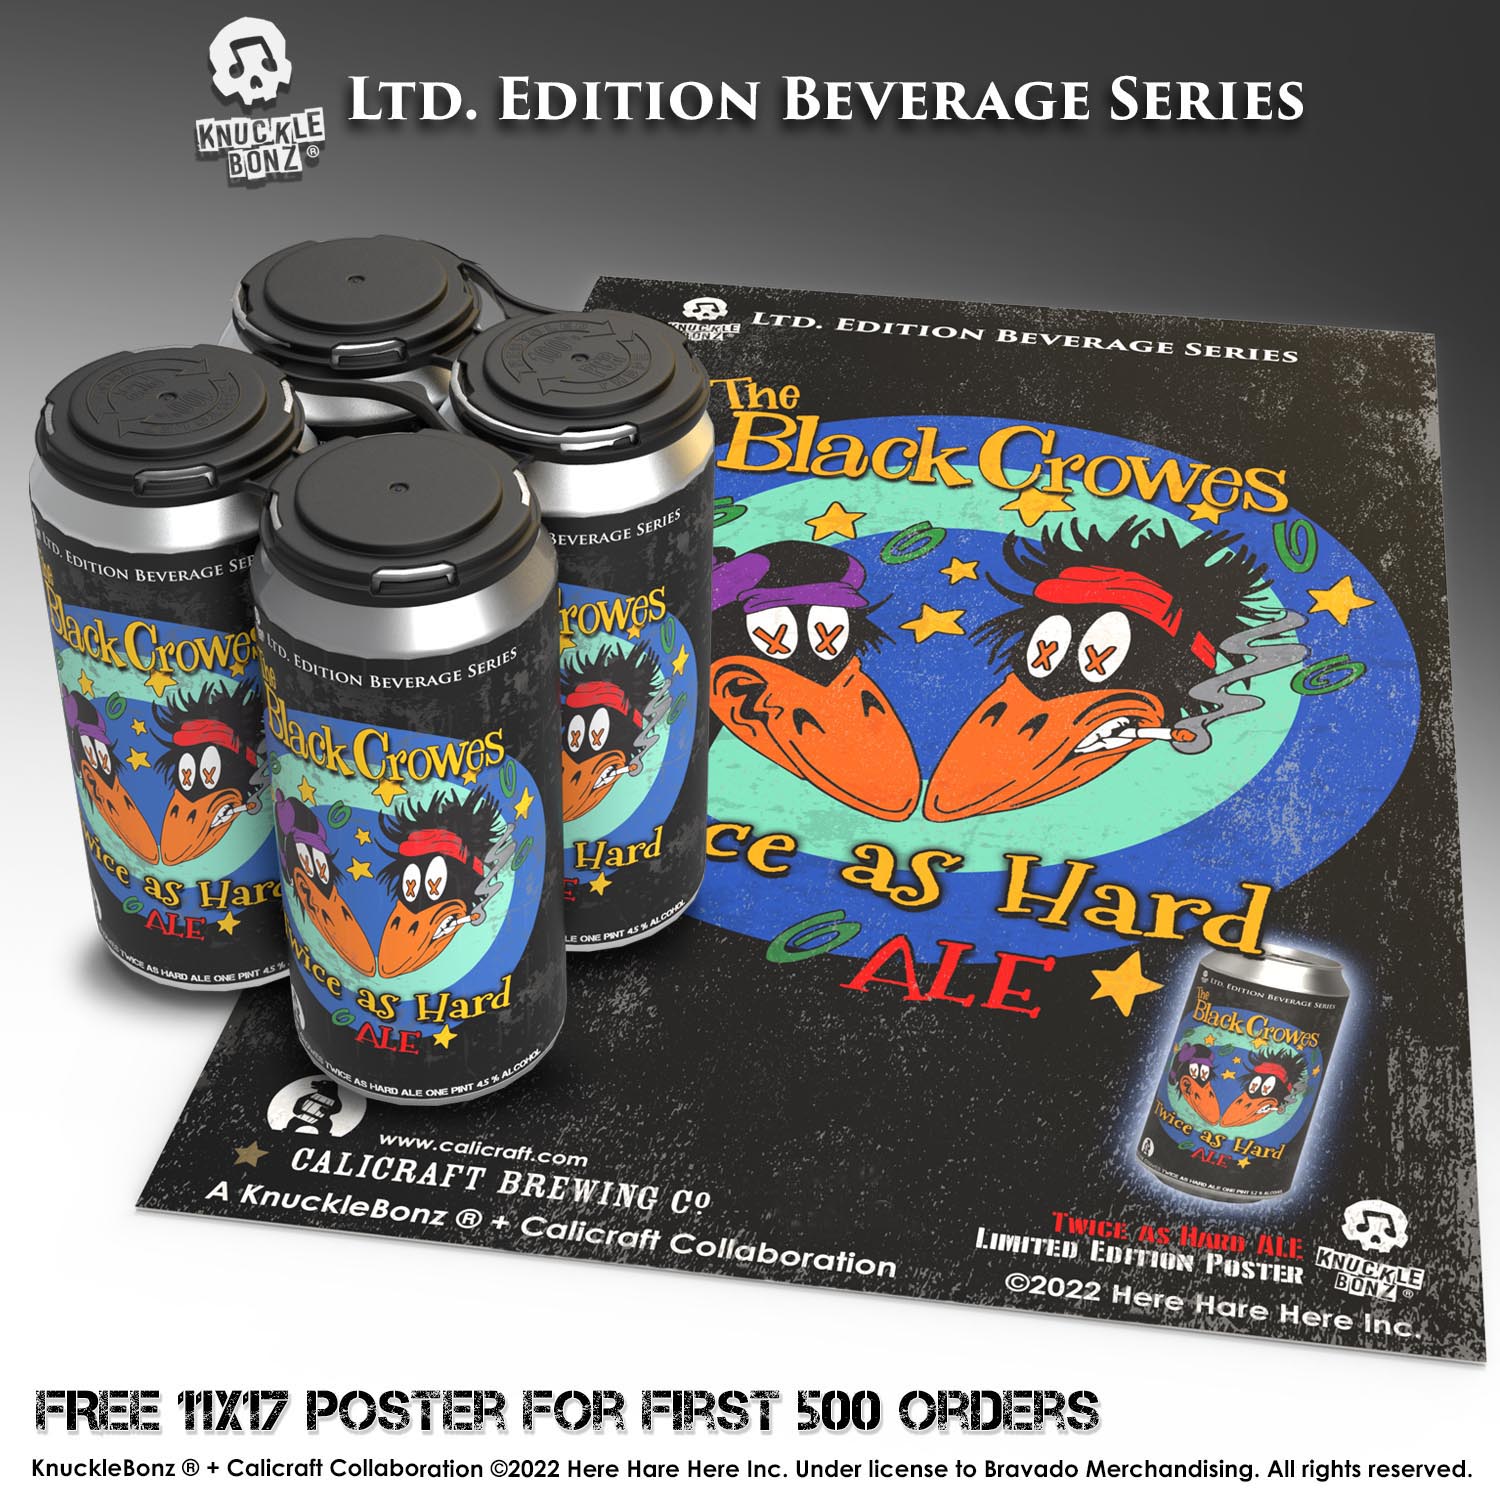 The Black Crowes “Twice as Hard” Ale